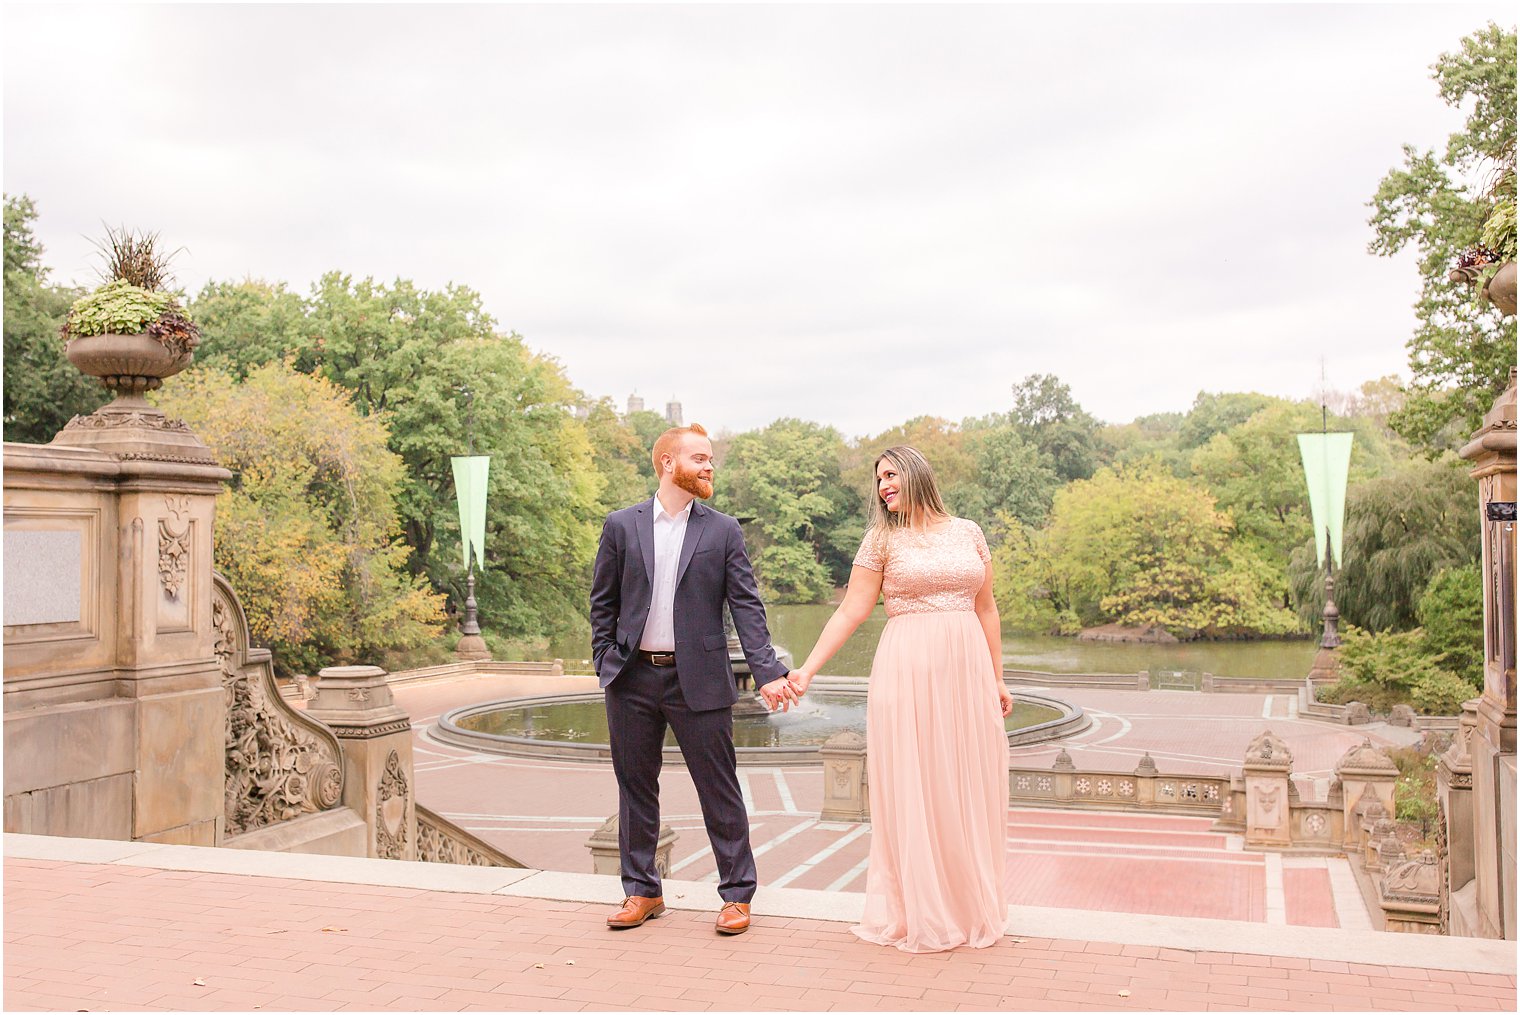 Engaged couple at Bethesda Terrace in Central Park with Bethesda Fountain in the background